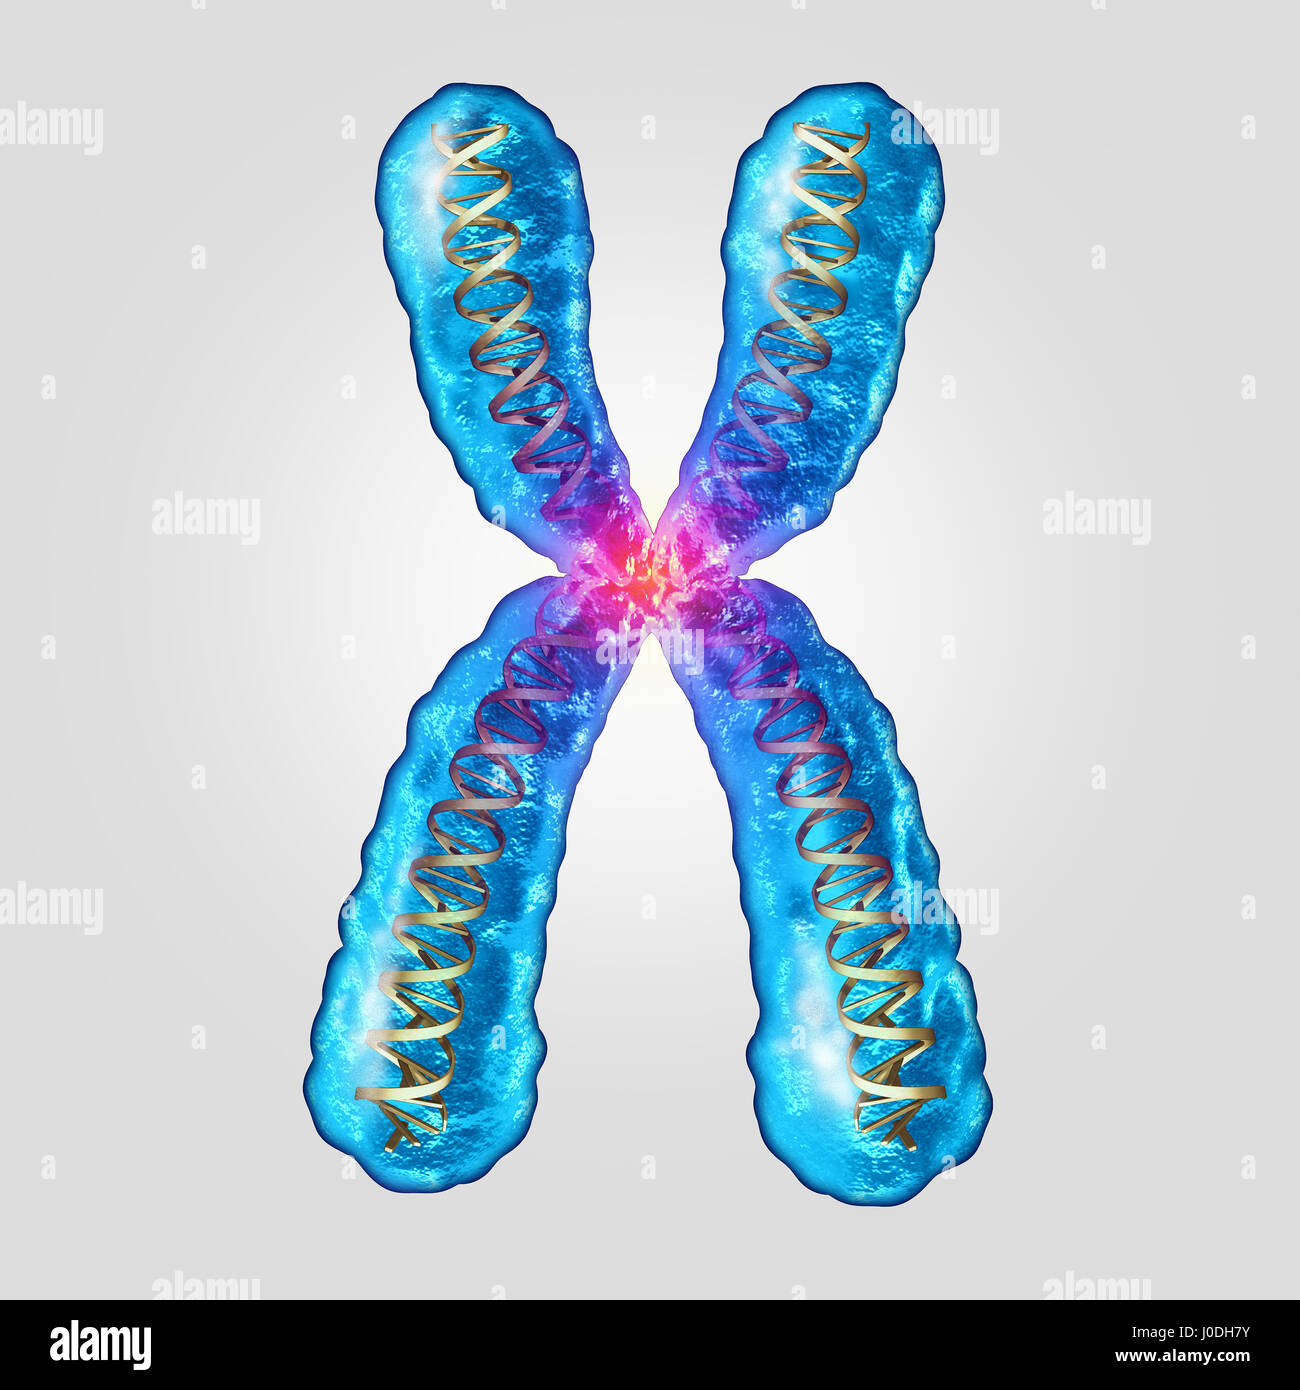 Chromosome genetic dna concept as a microscopic molecule with a double helix gene structure as a microbiology and medical symbol. Stock Photo